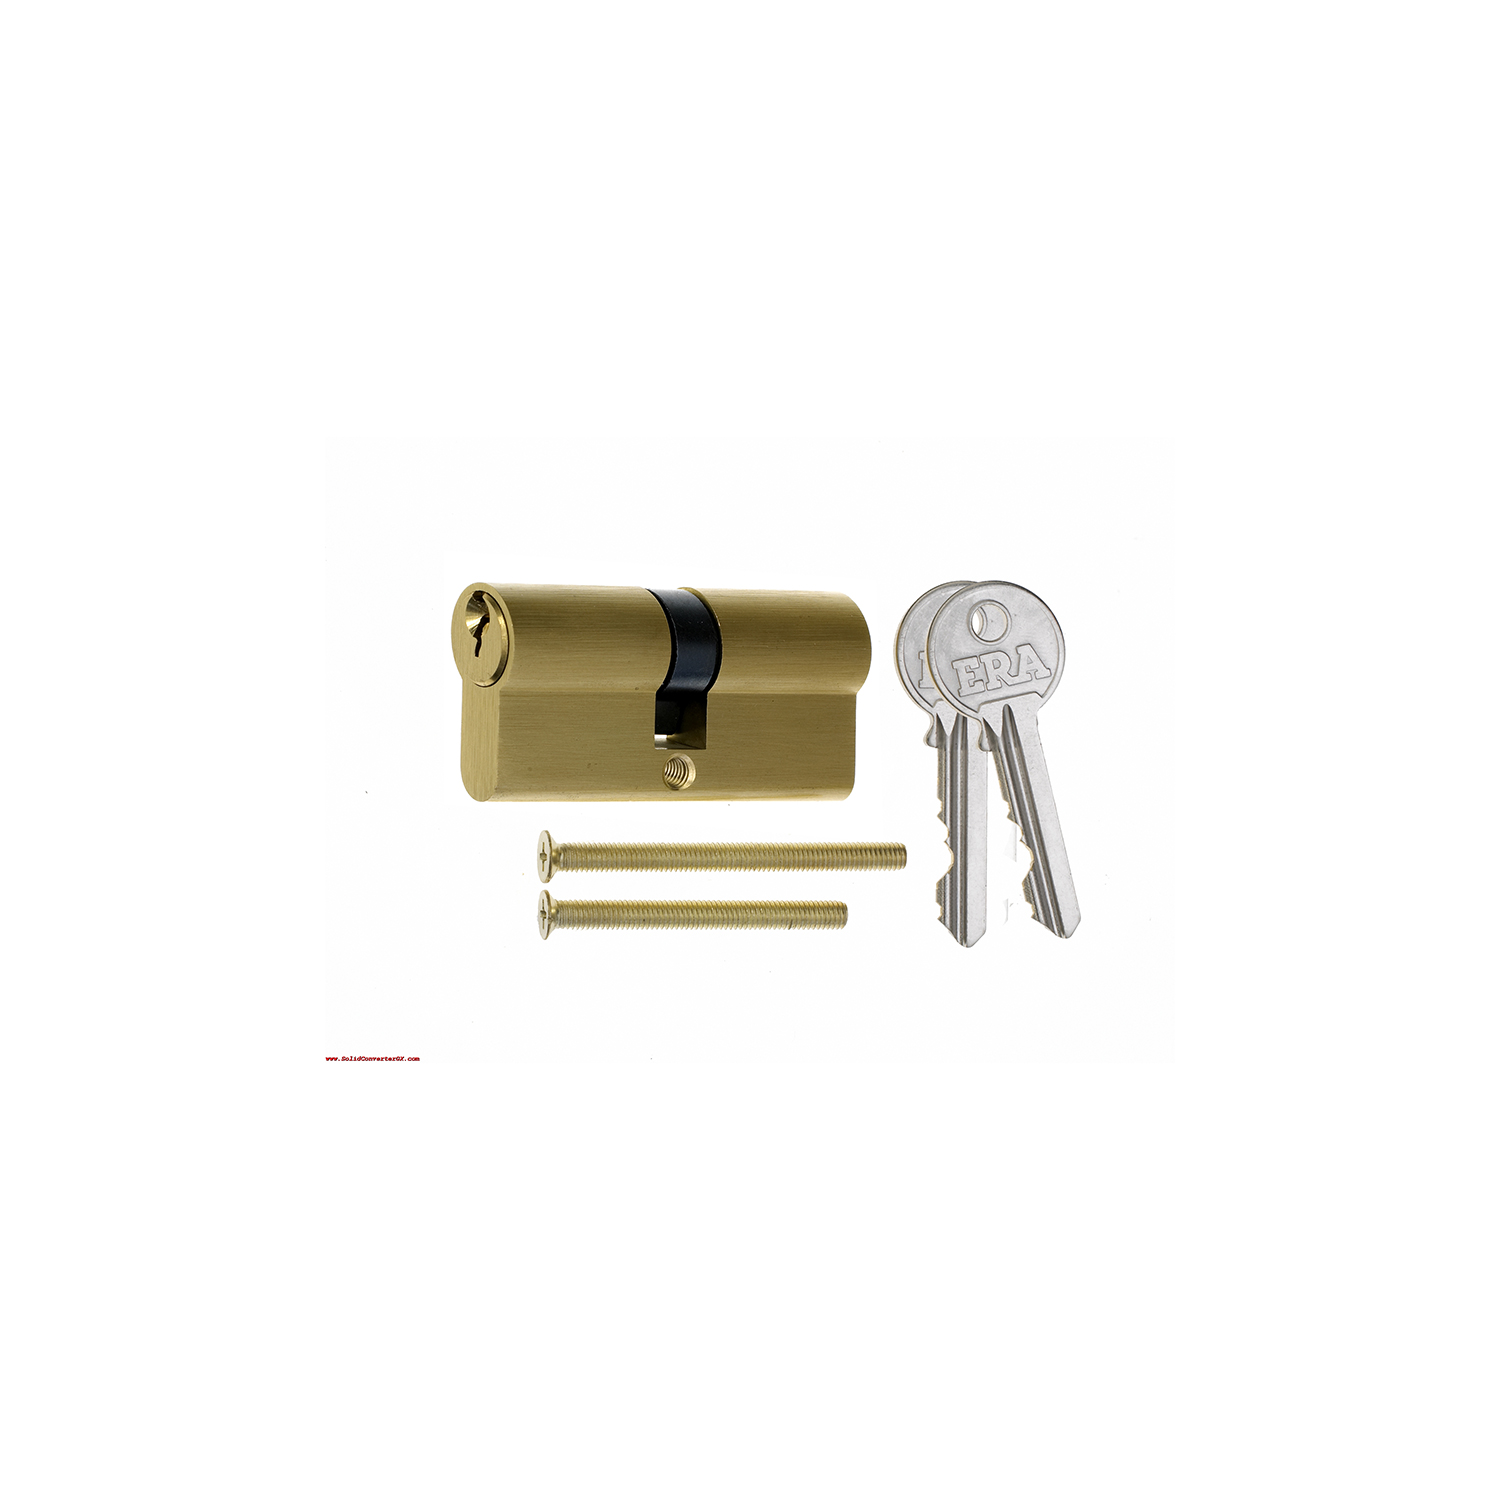 EURO-CYLINDER BRASS DOOR LOCK 6 PIN ANTI-DRILL KEYED DIFFERENT VARIOUS SIZES